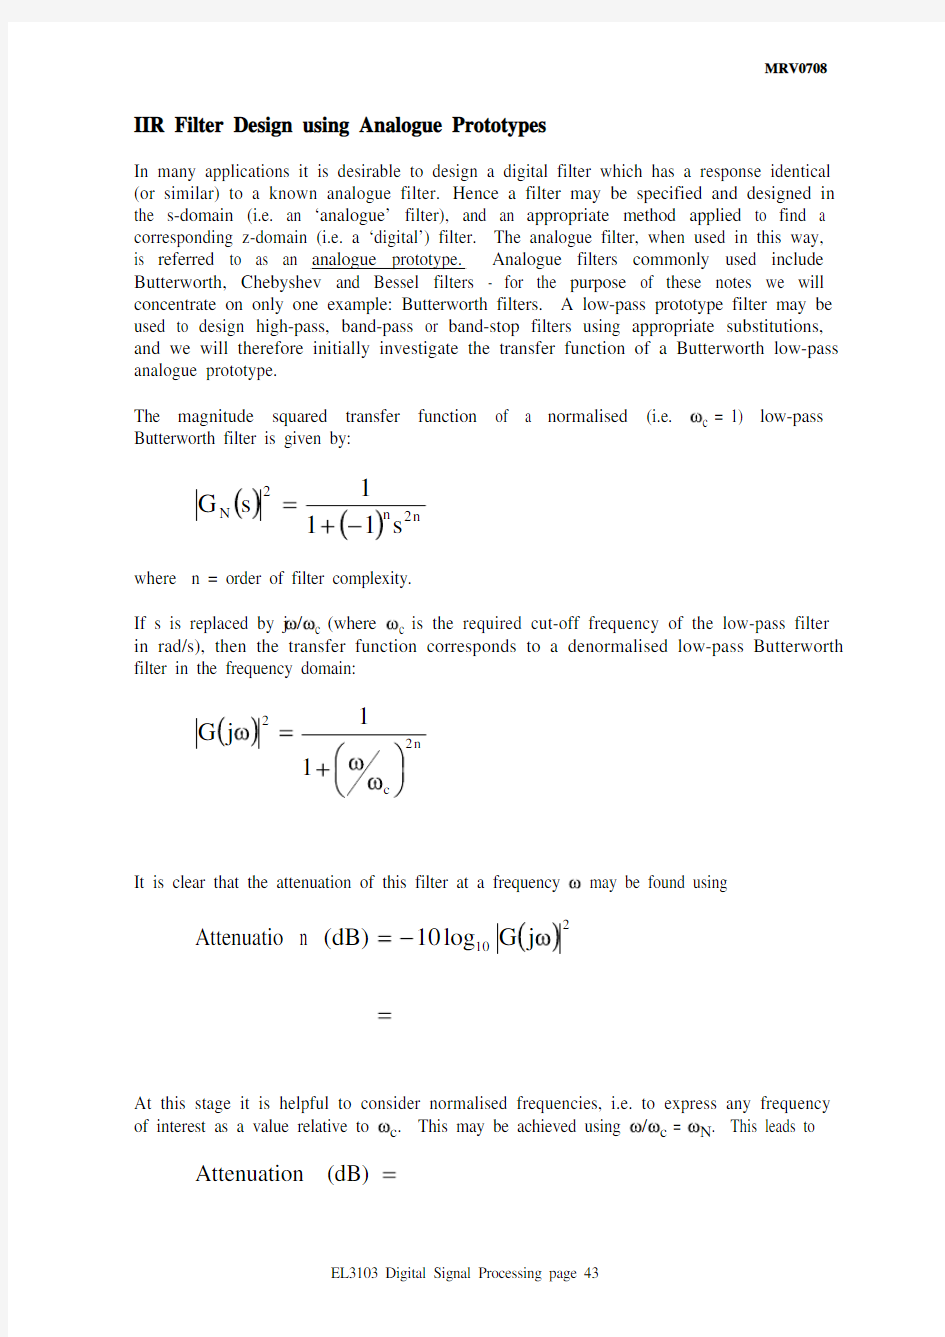 DSP Notes 2007-08 MRV p43-52